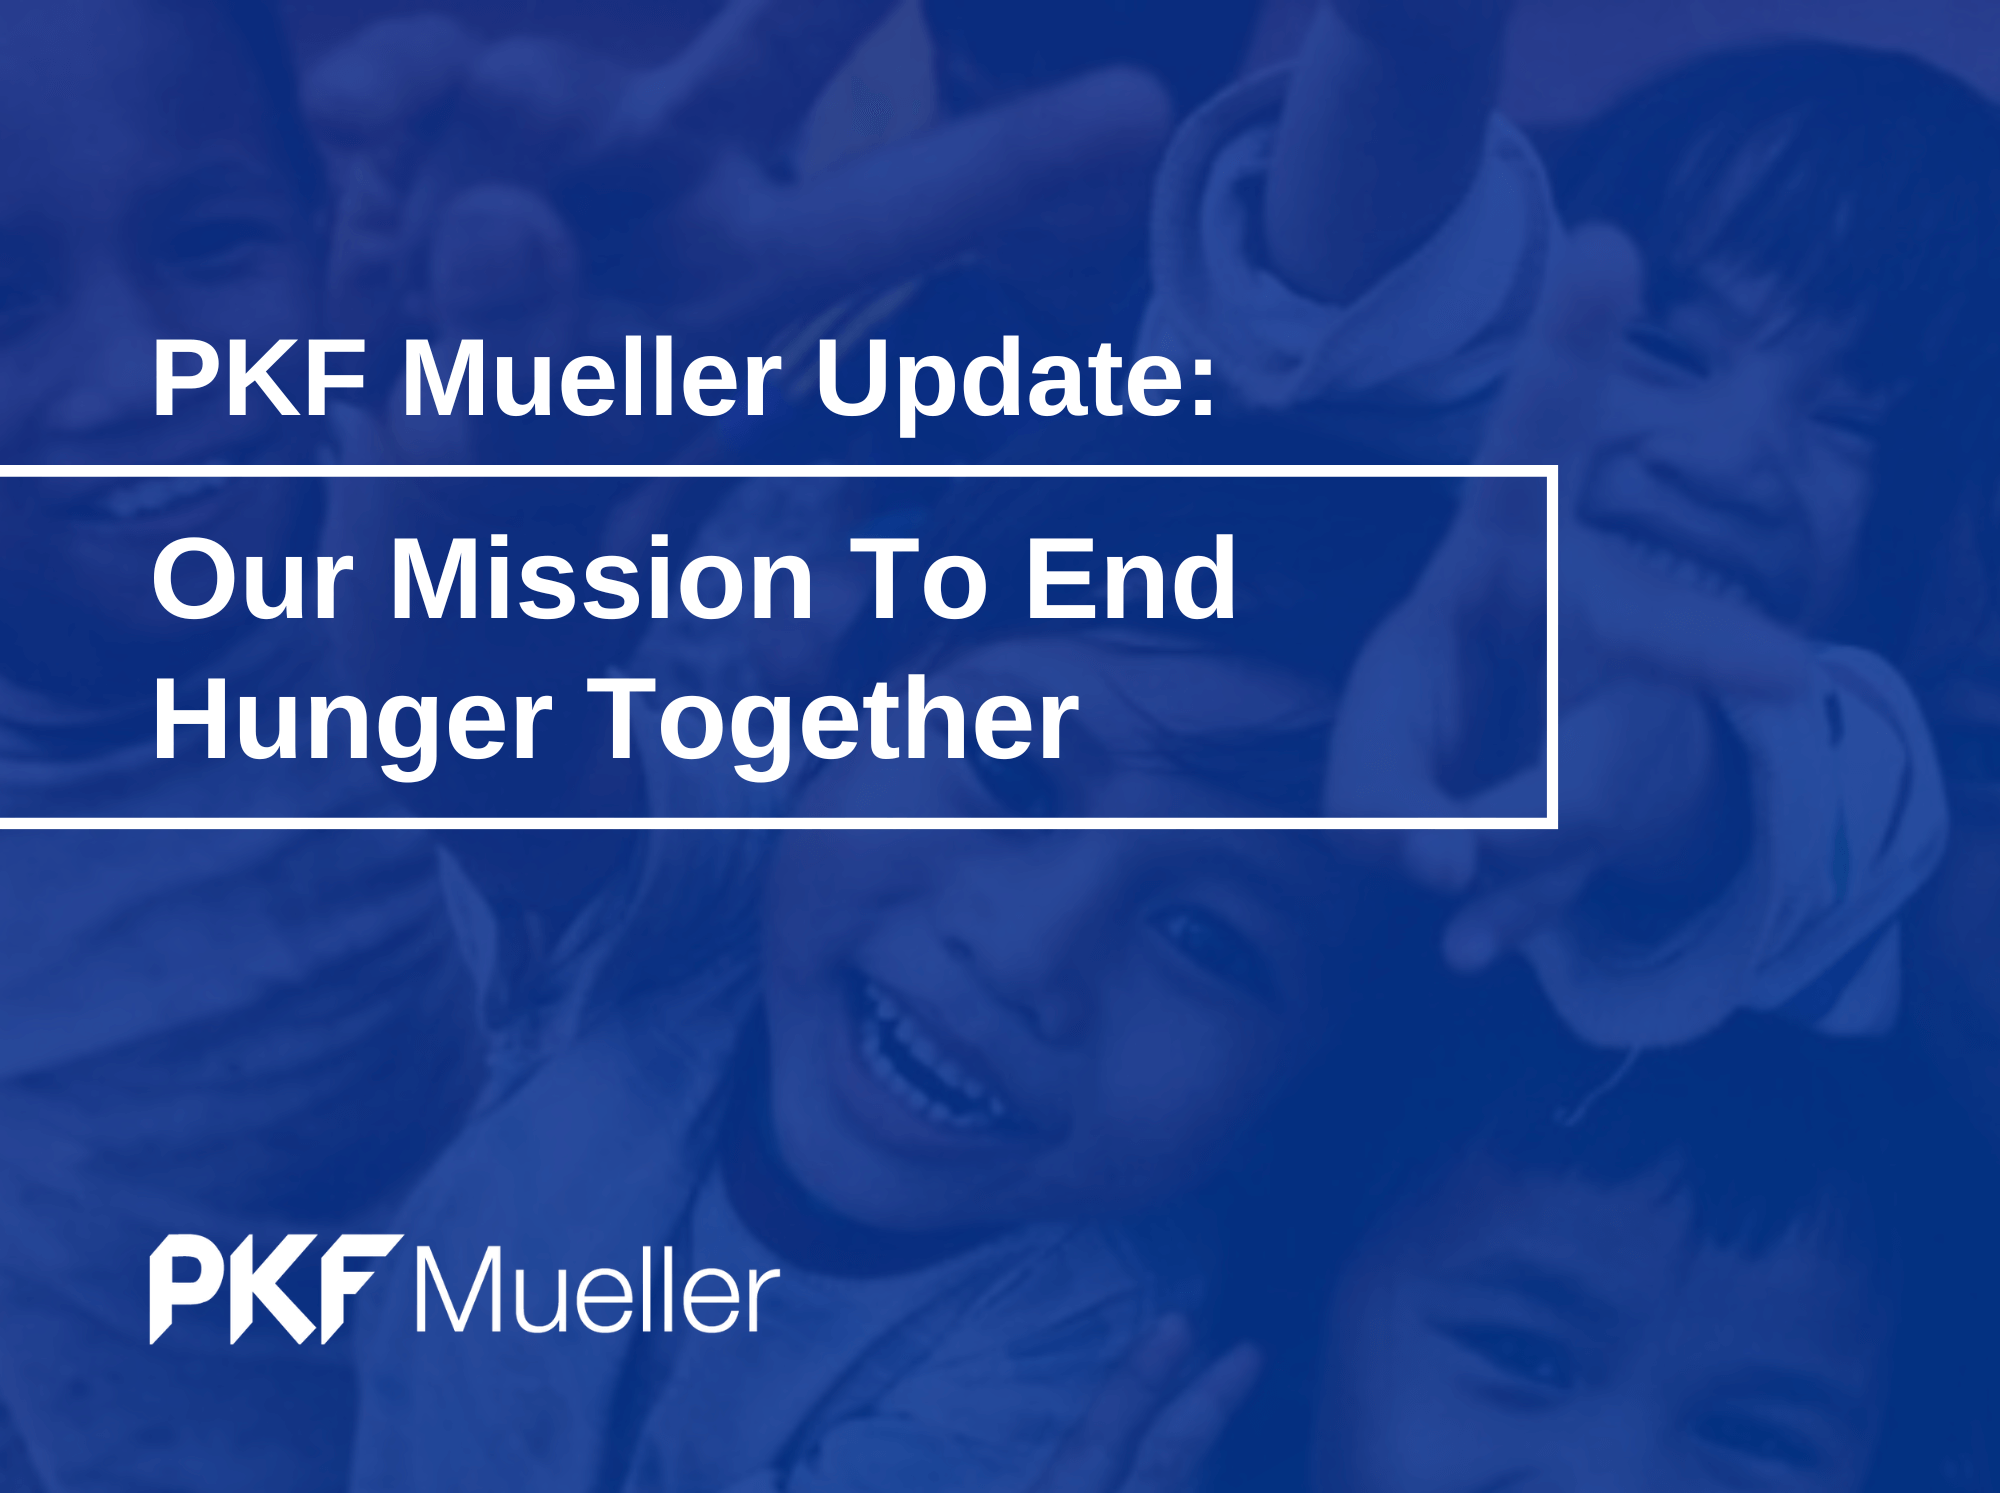 Our Mission to End Hunger Together with a Donation to Feed My Starving Children